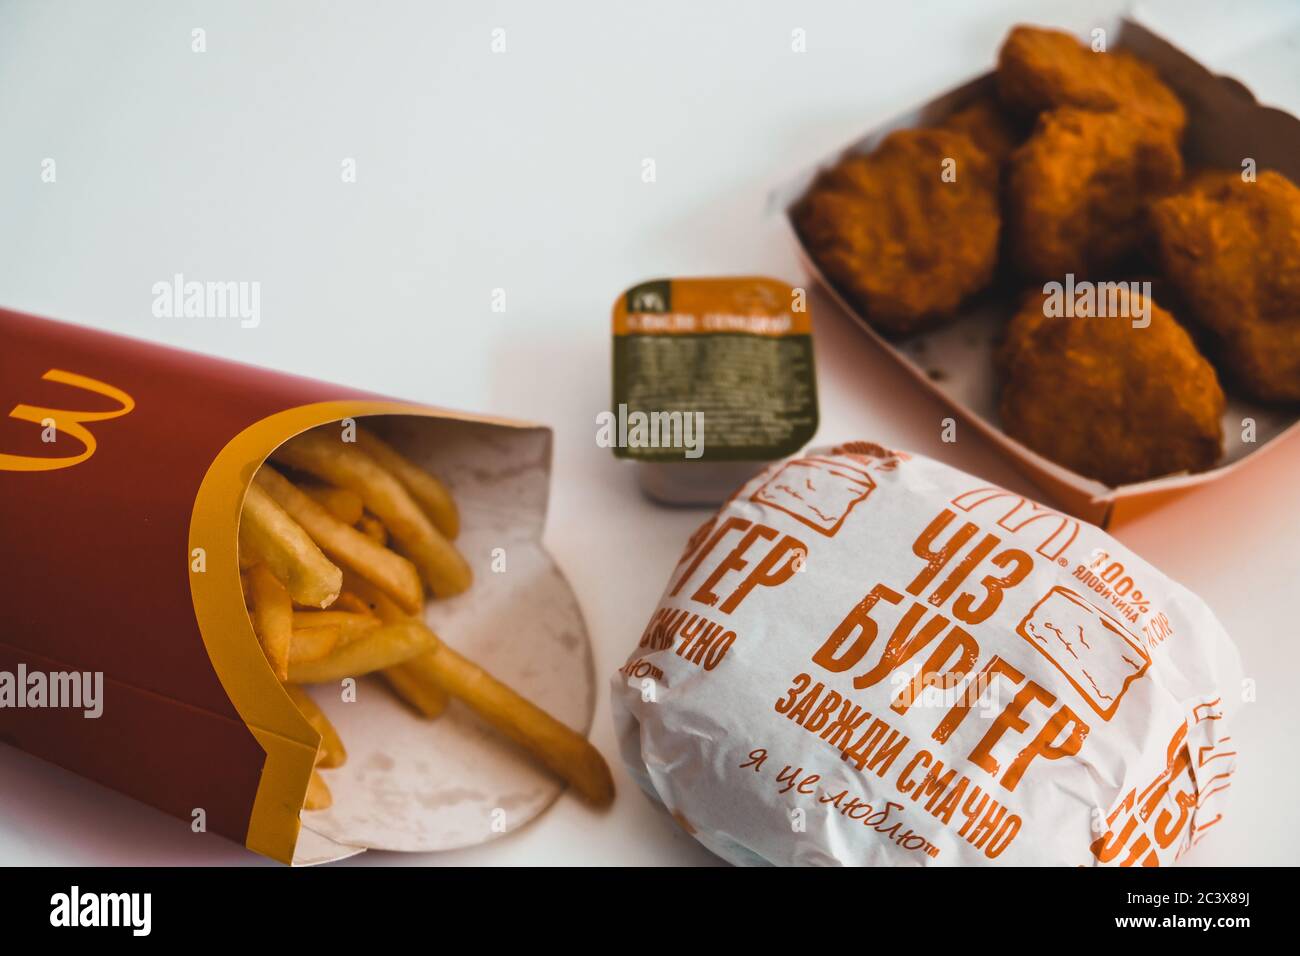 Lviv / Ukraine - April 2020: Whole meal from Ukrainian Mcdonalds on a white table at home. Unhealthy eating during coronavirus outbreak. Takeout food. Stock Photo